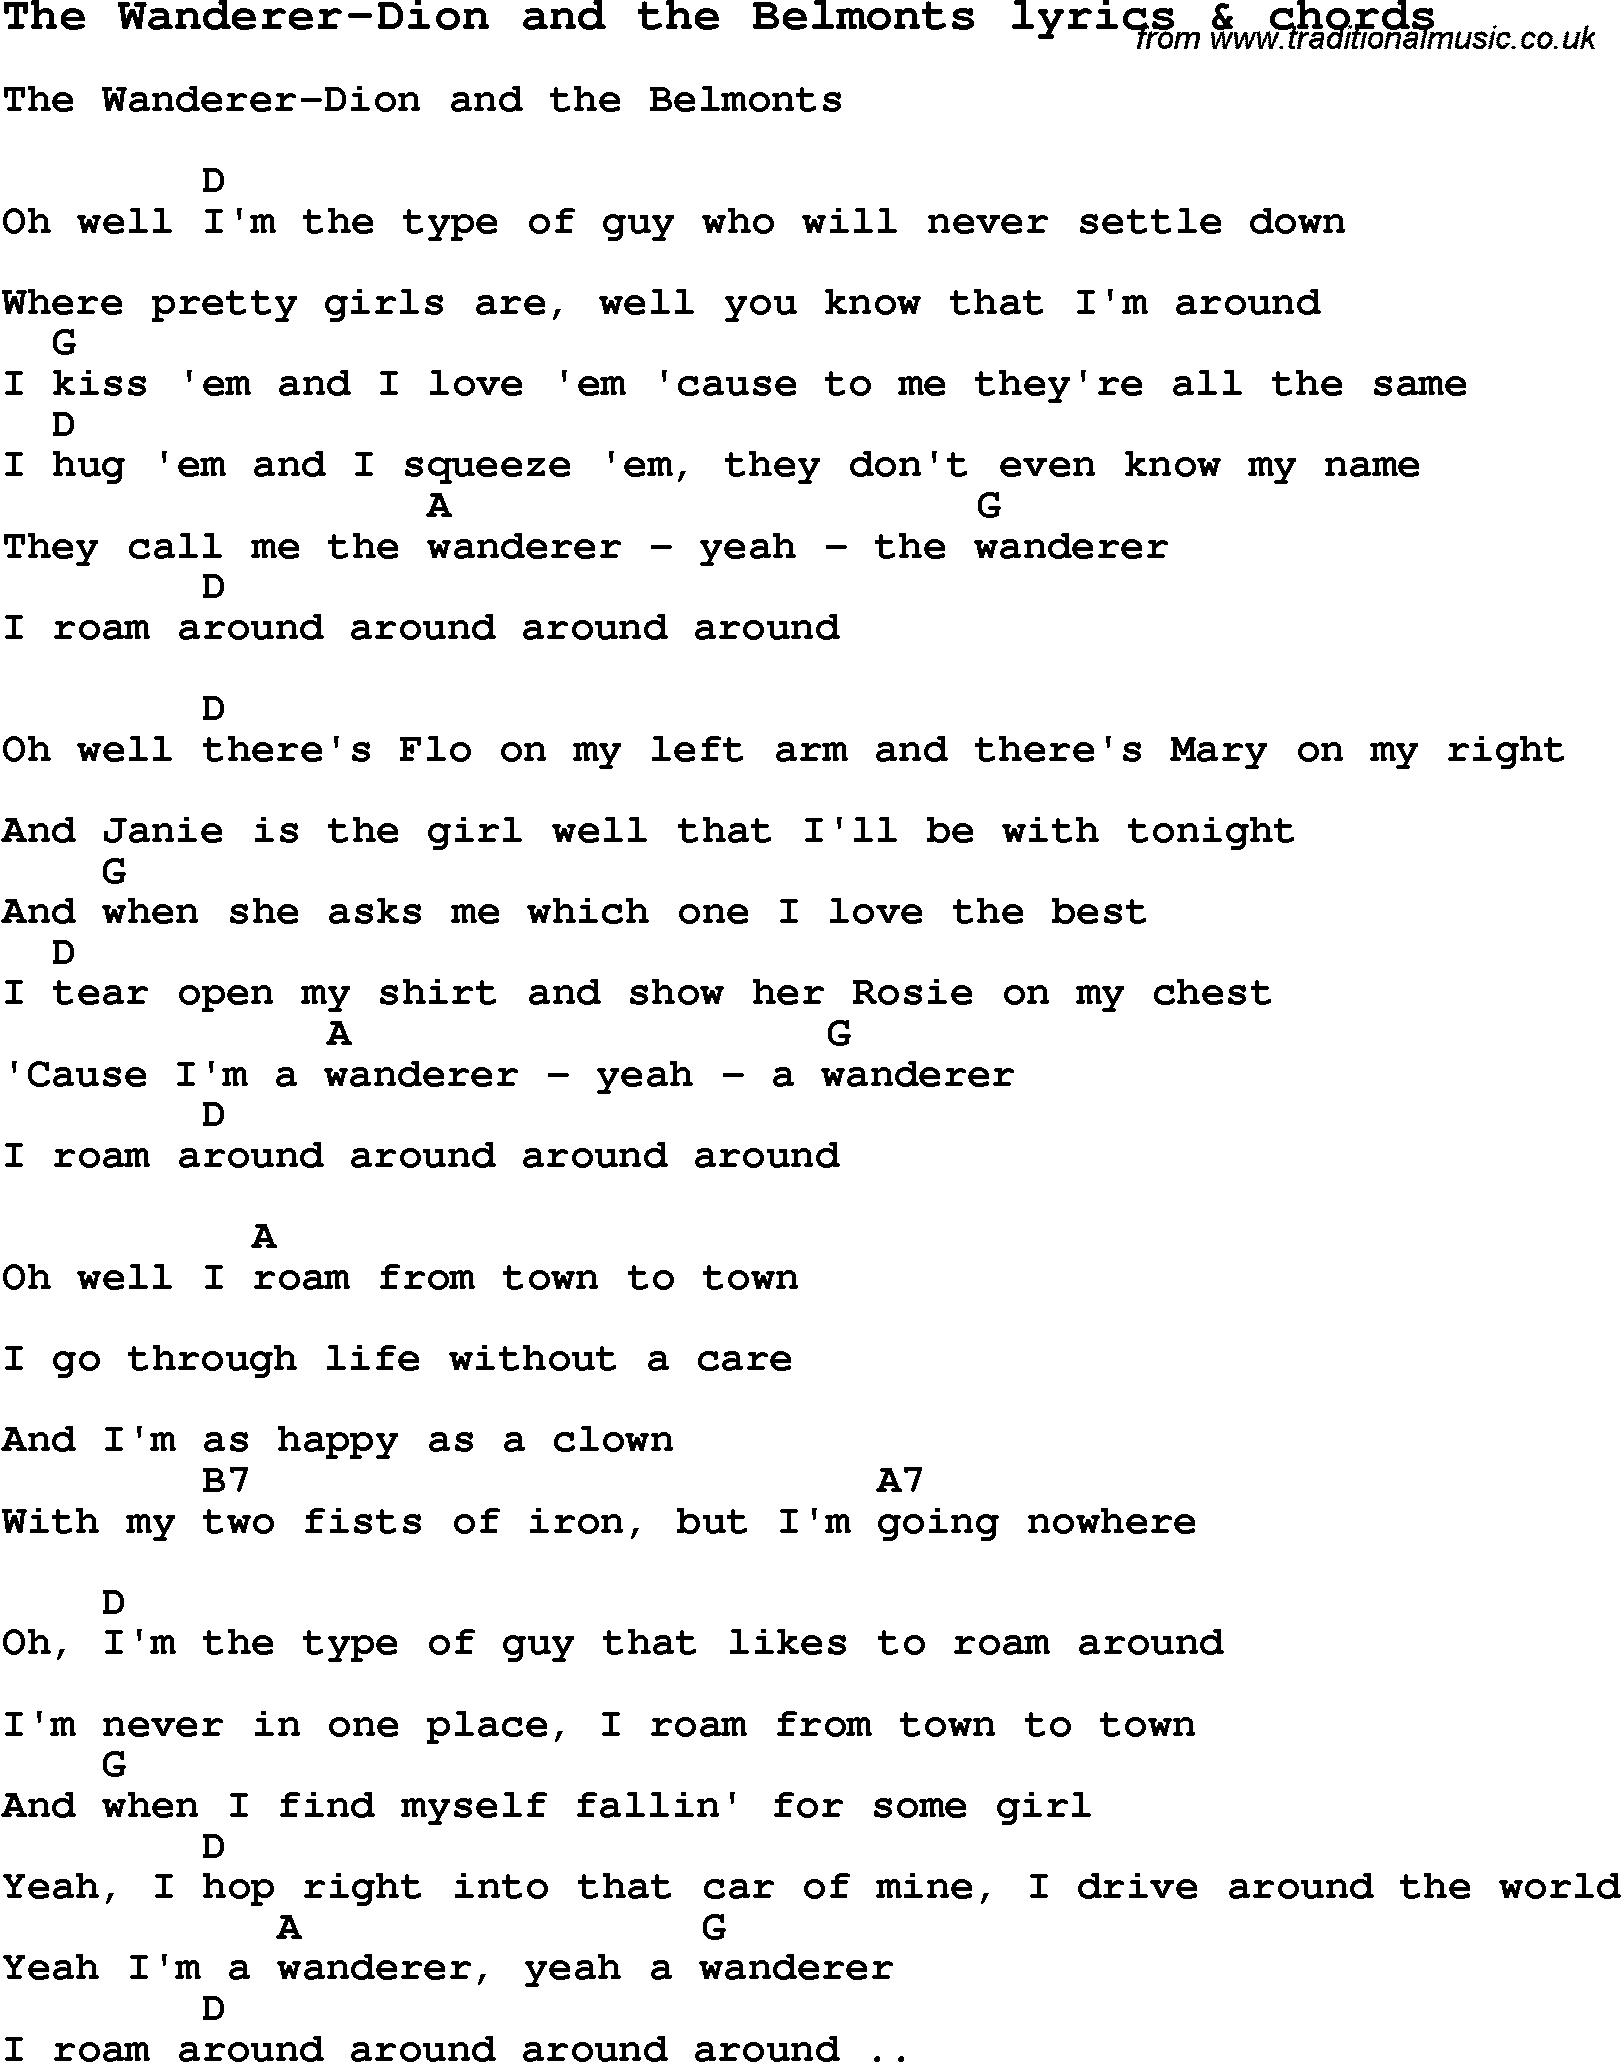 Love Song Lyrics for: The Wanderer-Dion and the Belmonts with chords for Ukulele, Guitar Banjo etc.